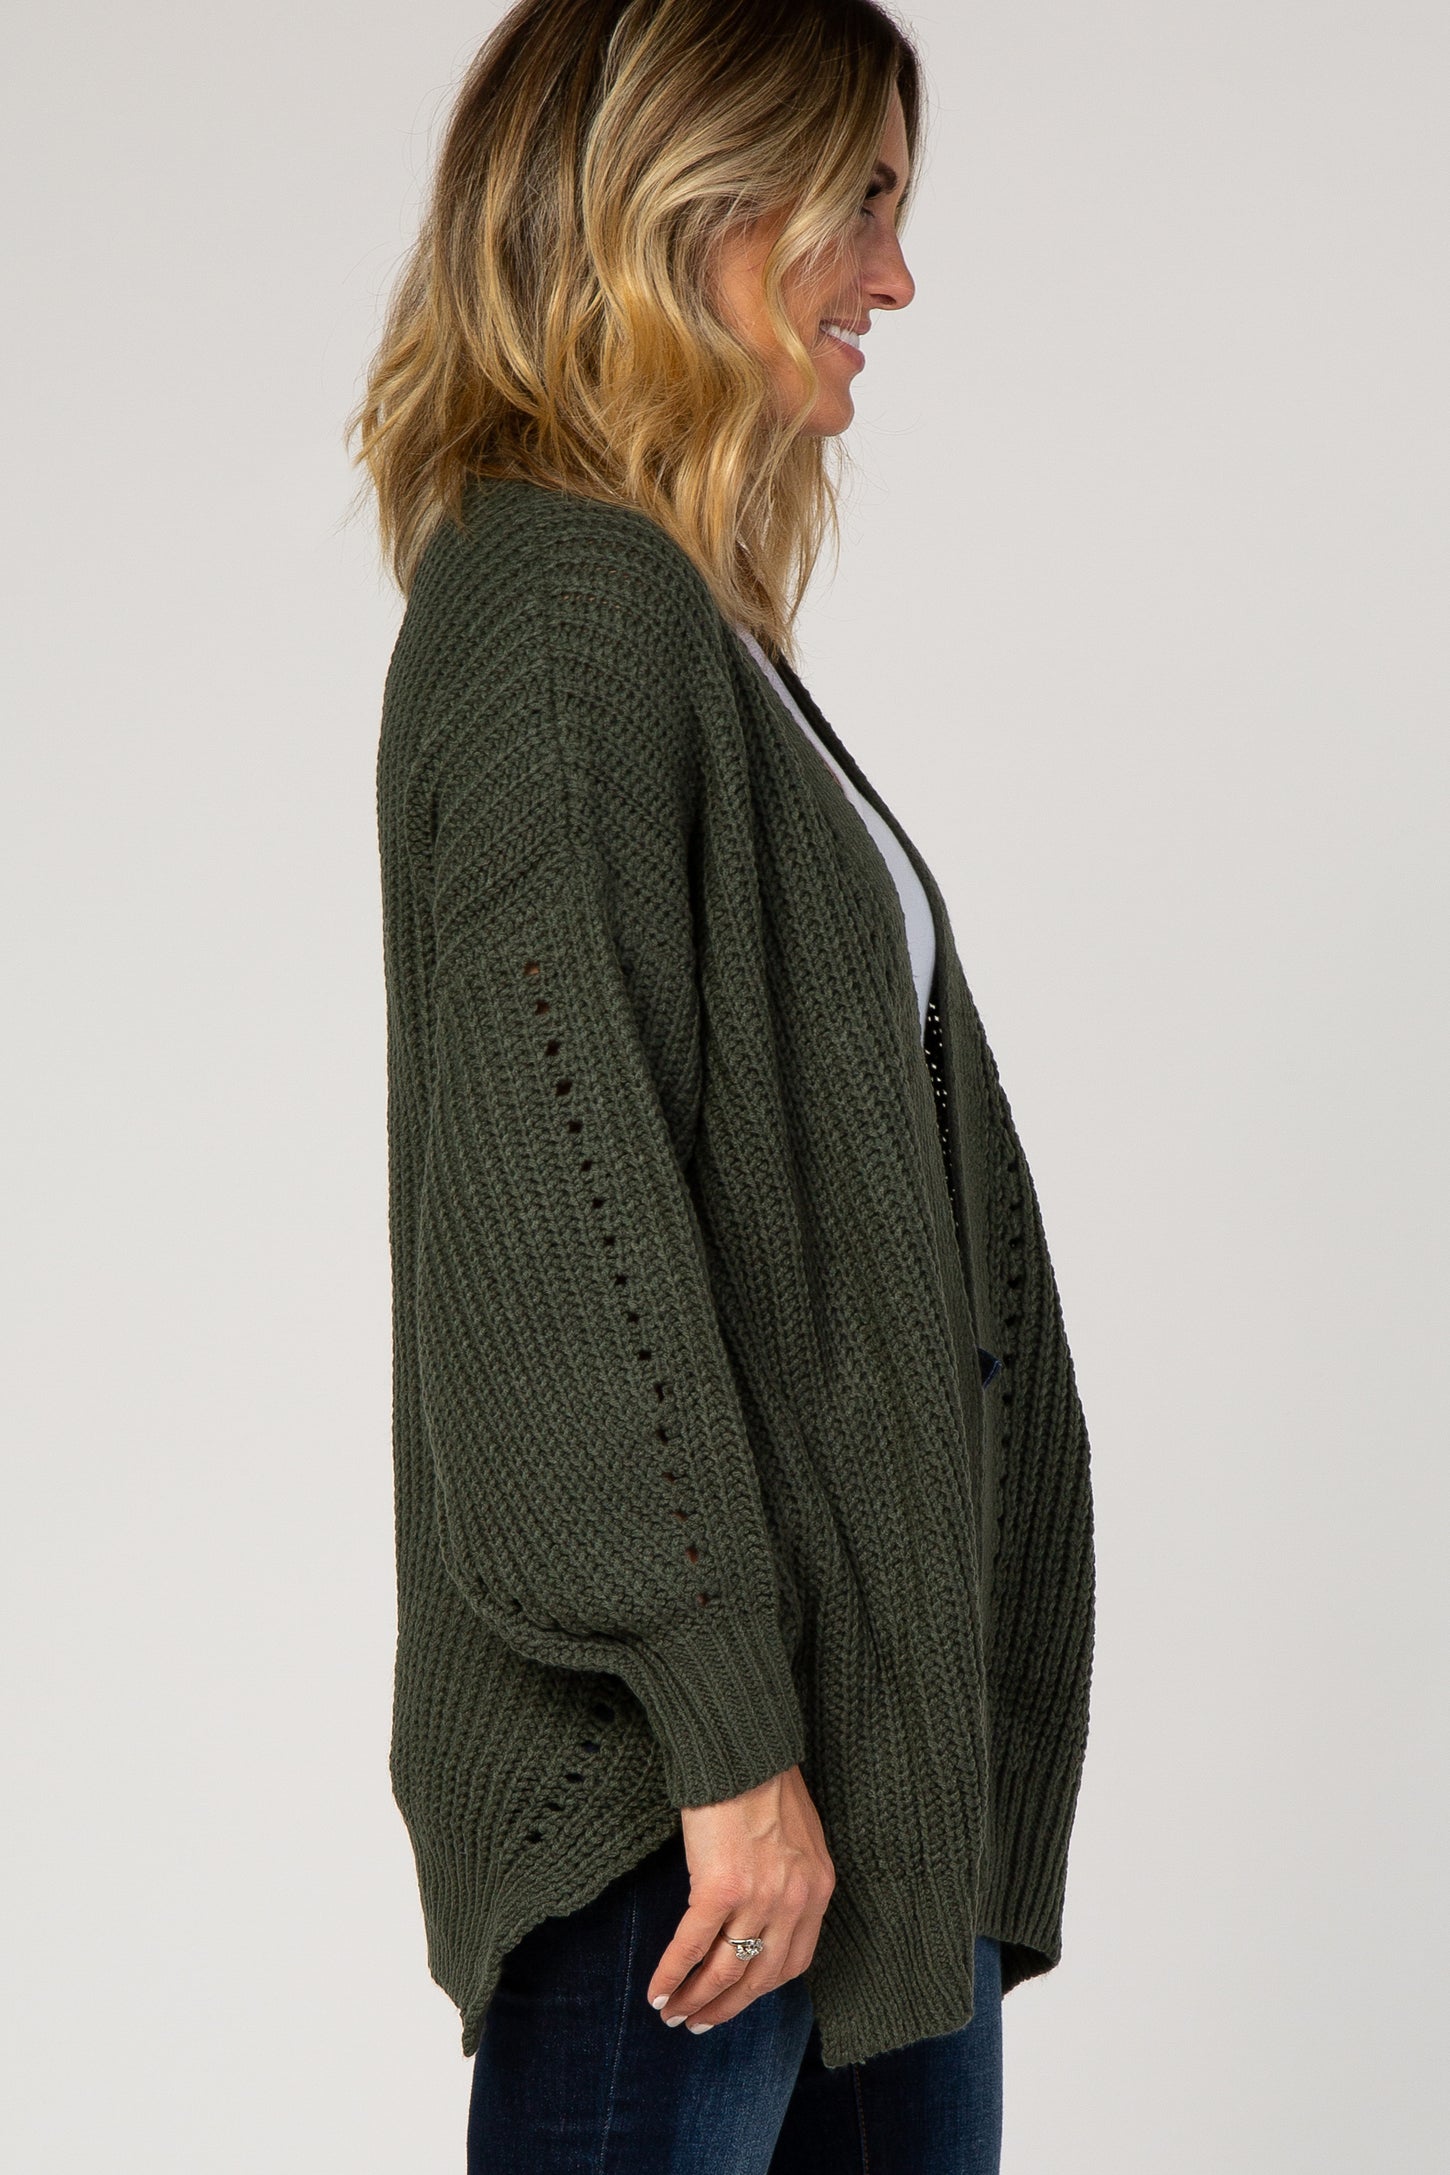 Olive Knit Open Front Bubble Sleeve Sweater